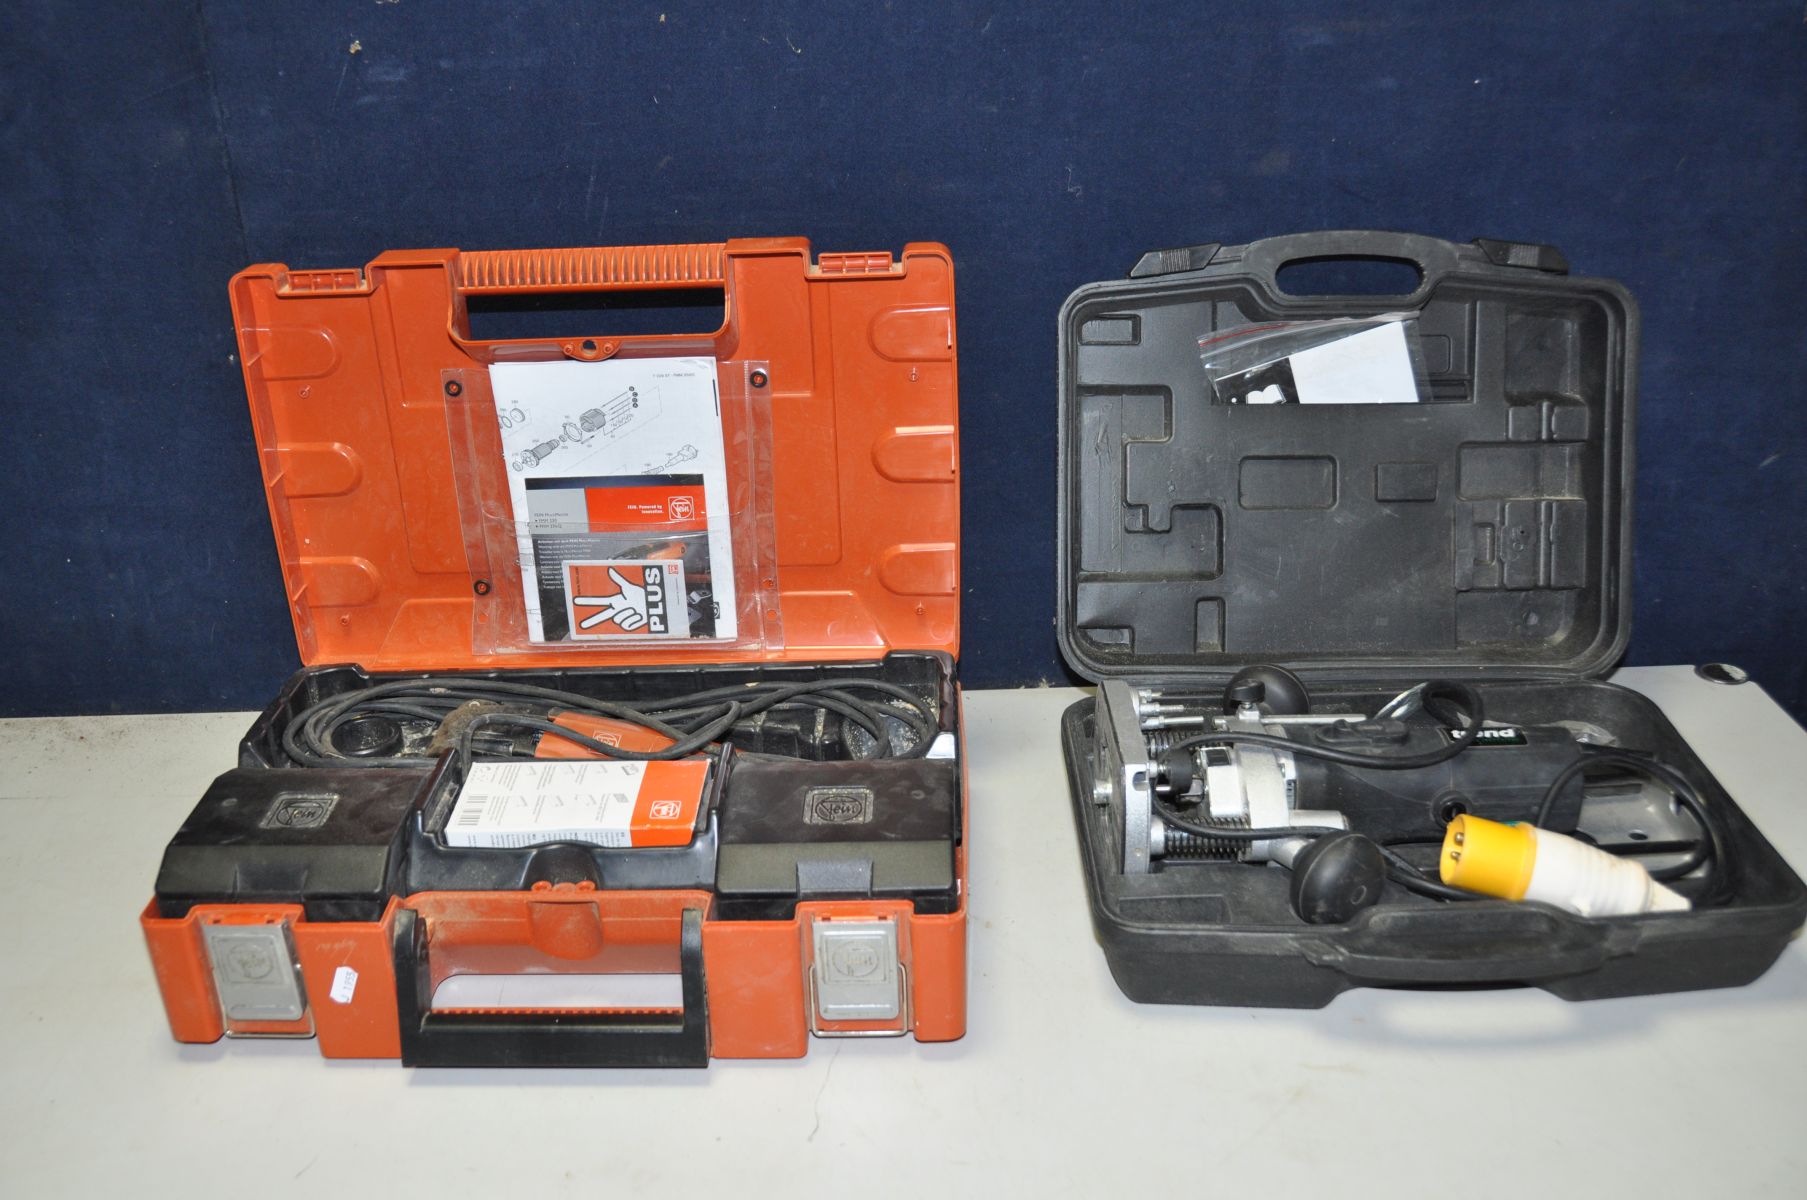 A FEIN MULTIMASTER FMM250Q 110v multi tool with attachments in case, 110v extension cord and a cased